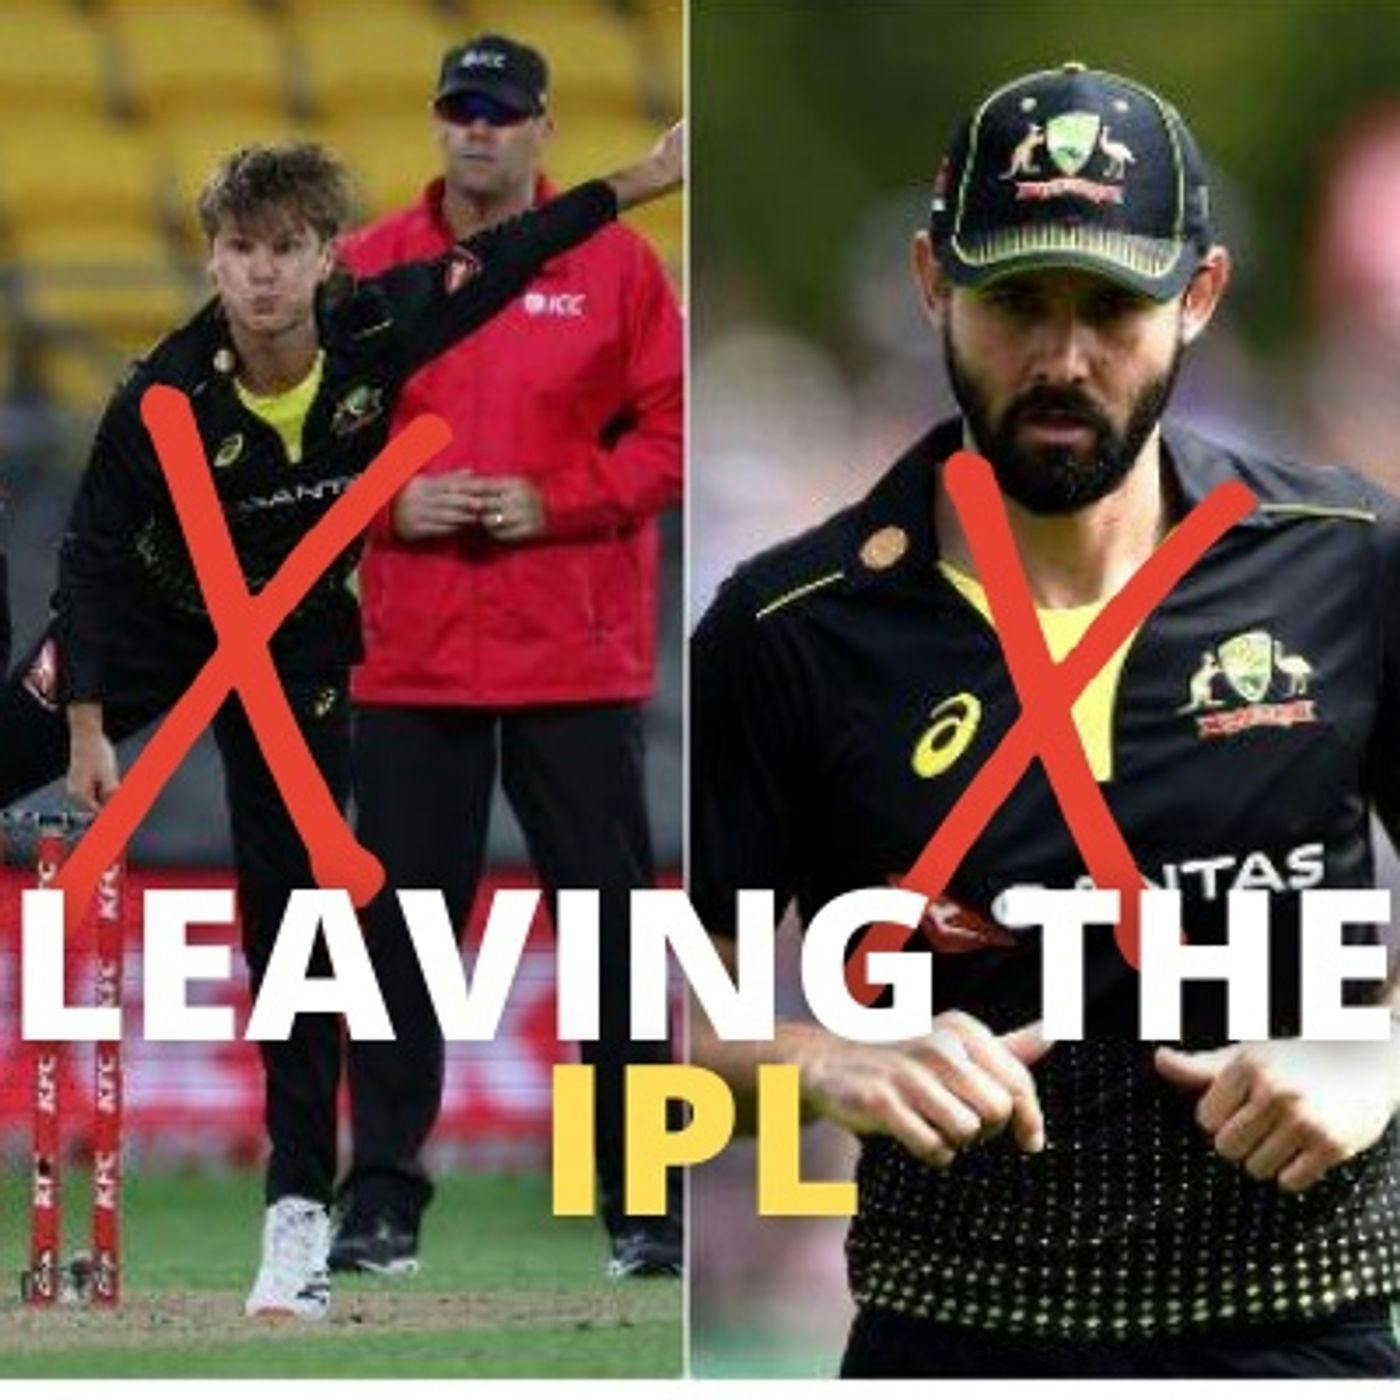 County Cricket Round 3 Review | Brexit V Cricket | Players Leave The IPL